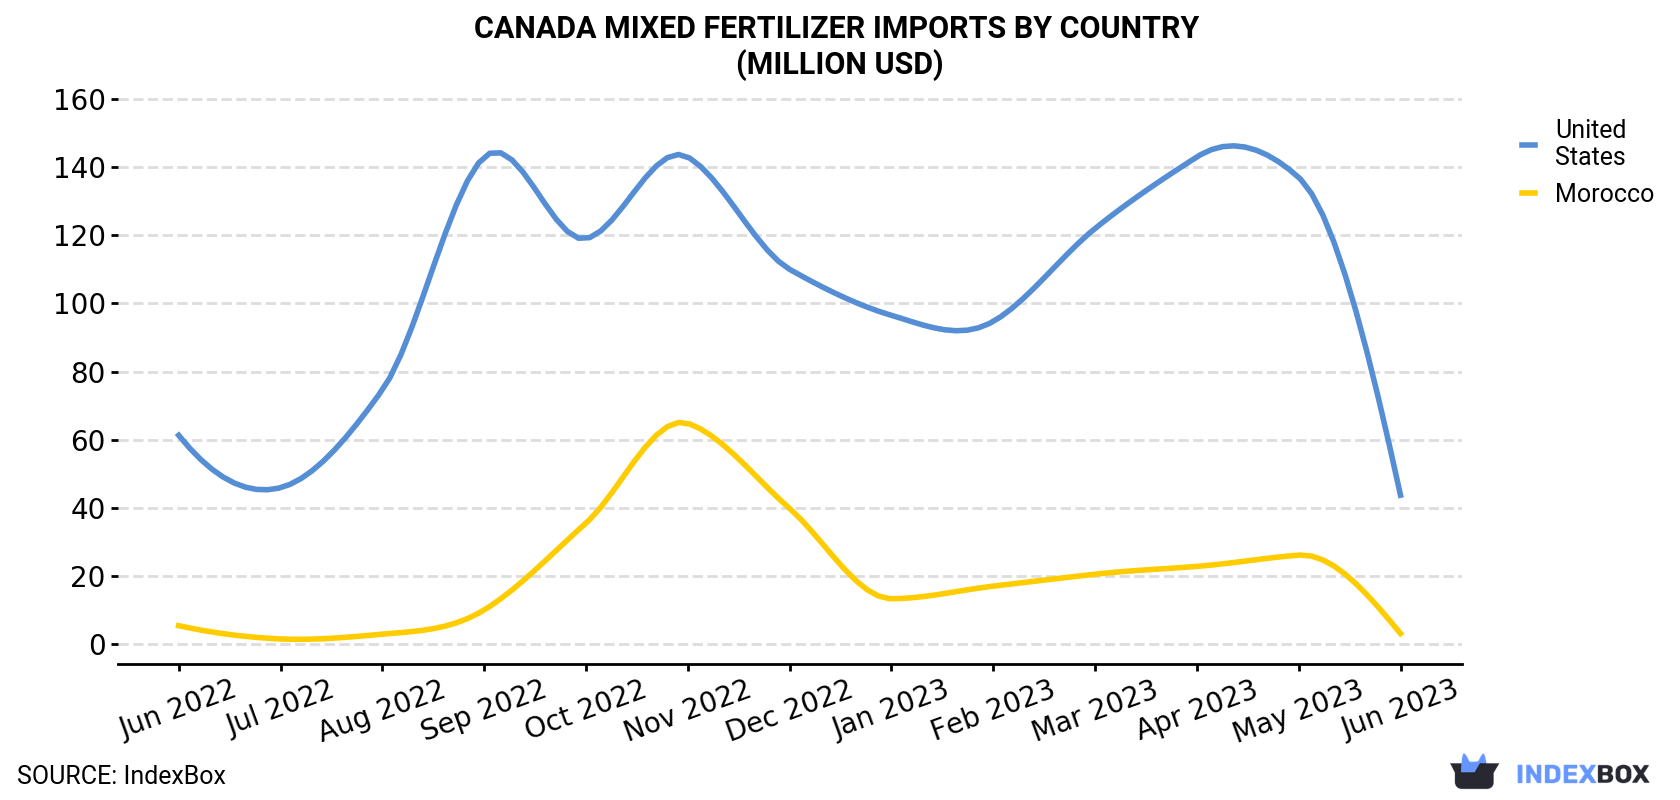 Canada Mixed Fertilizer Imports By Country (Million USD)